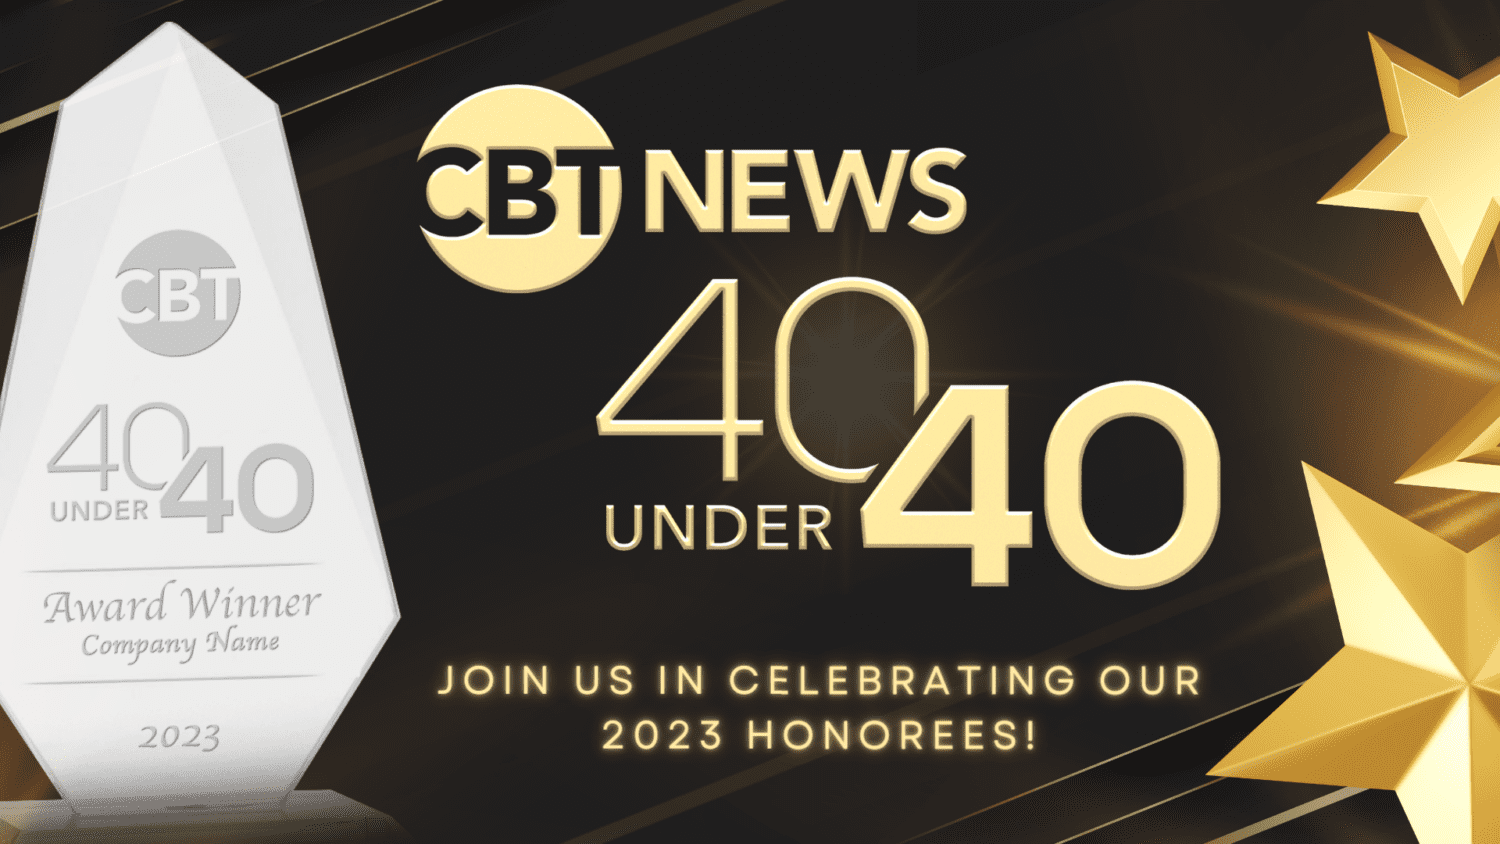 CBT News is honored to present the recipients of the first-ever CBT News 40 Under 40 awards.